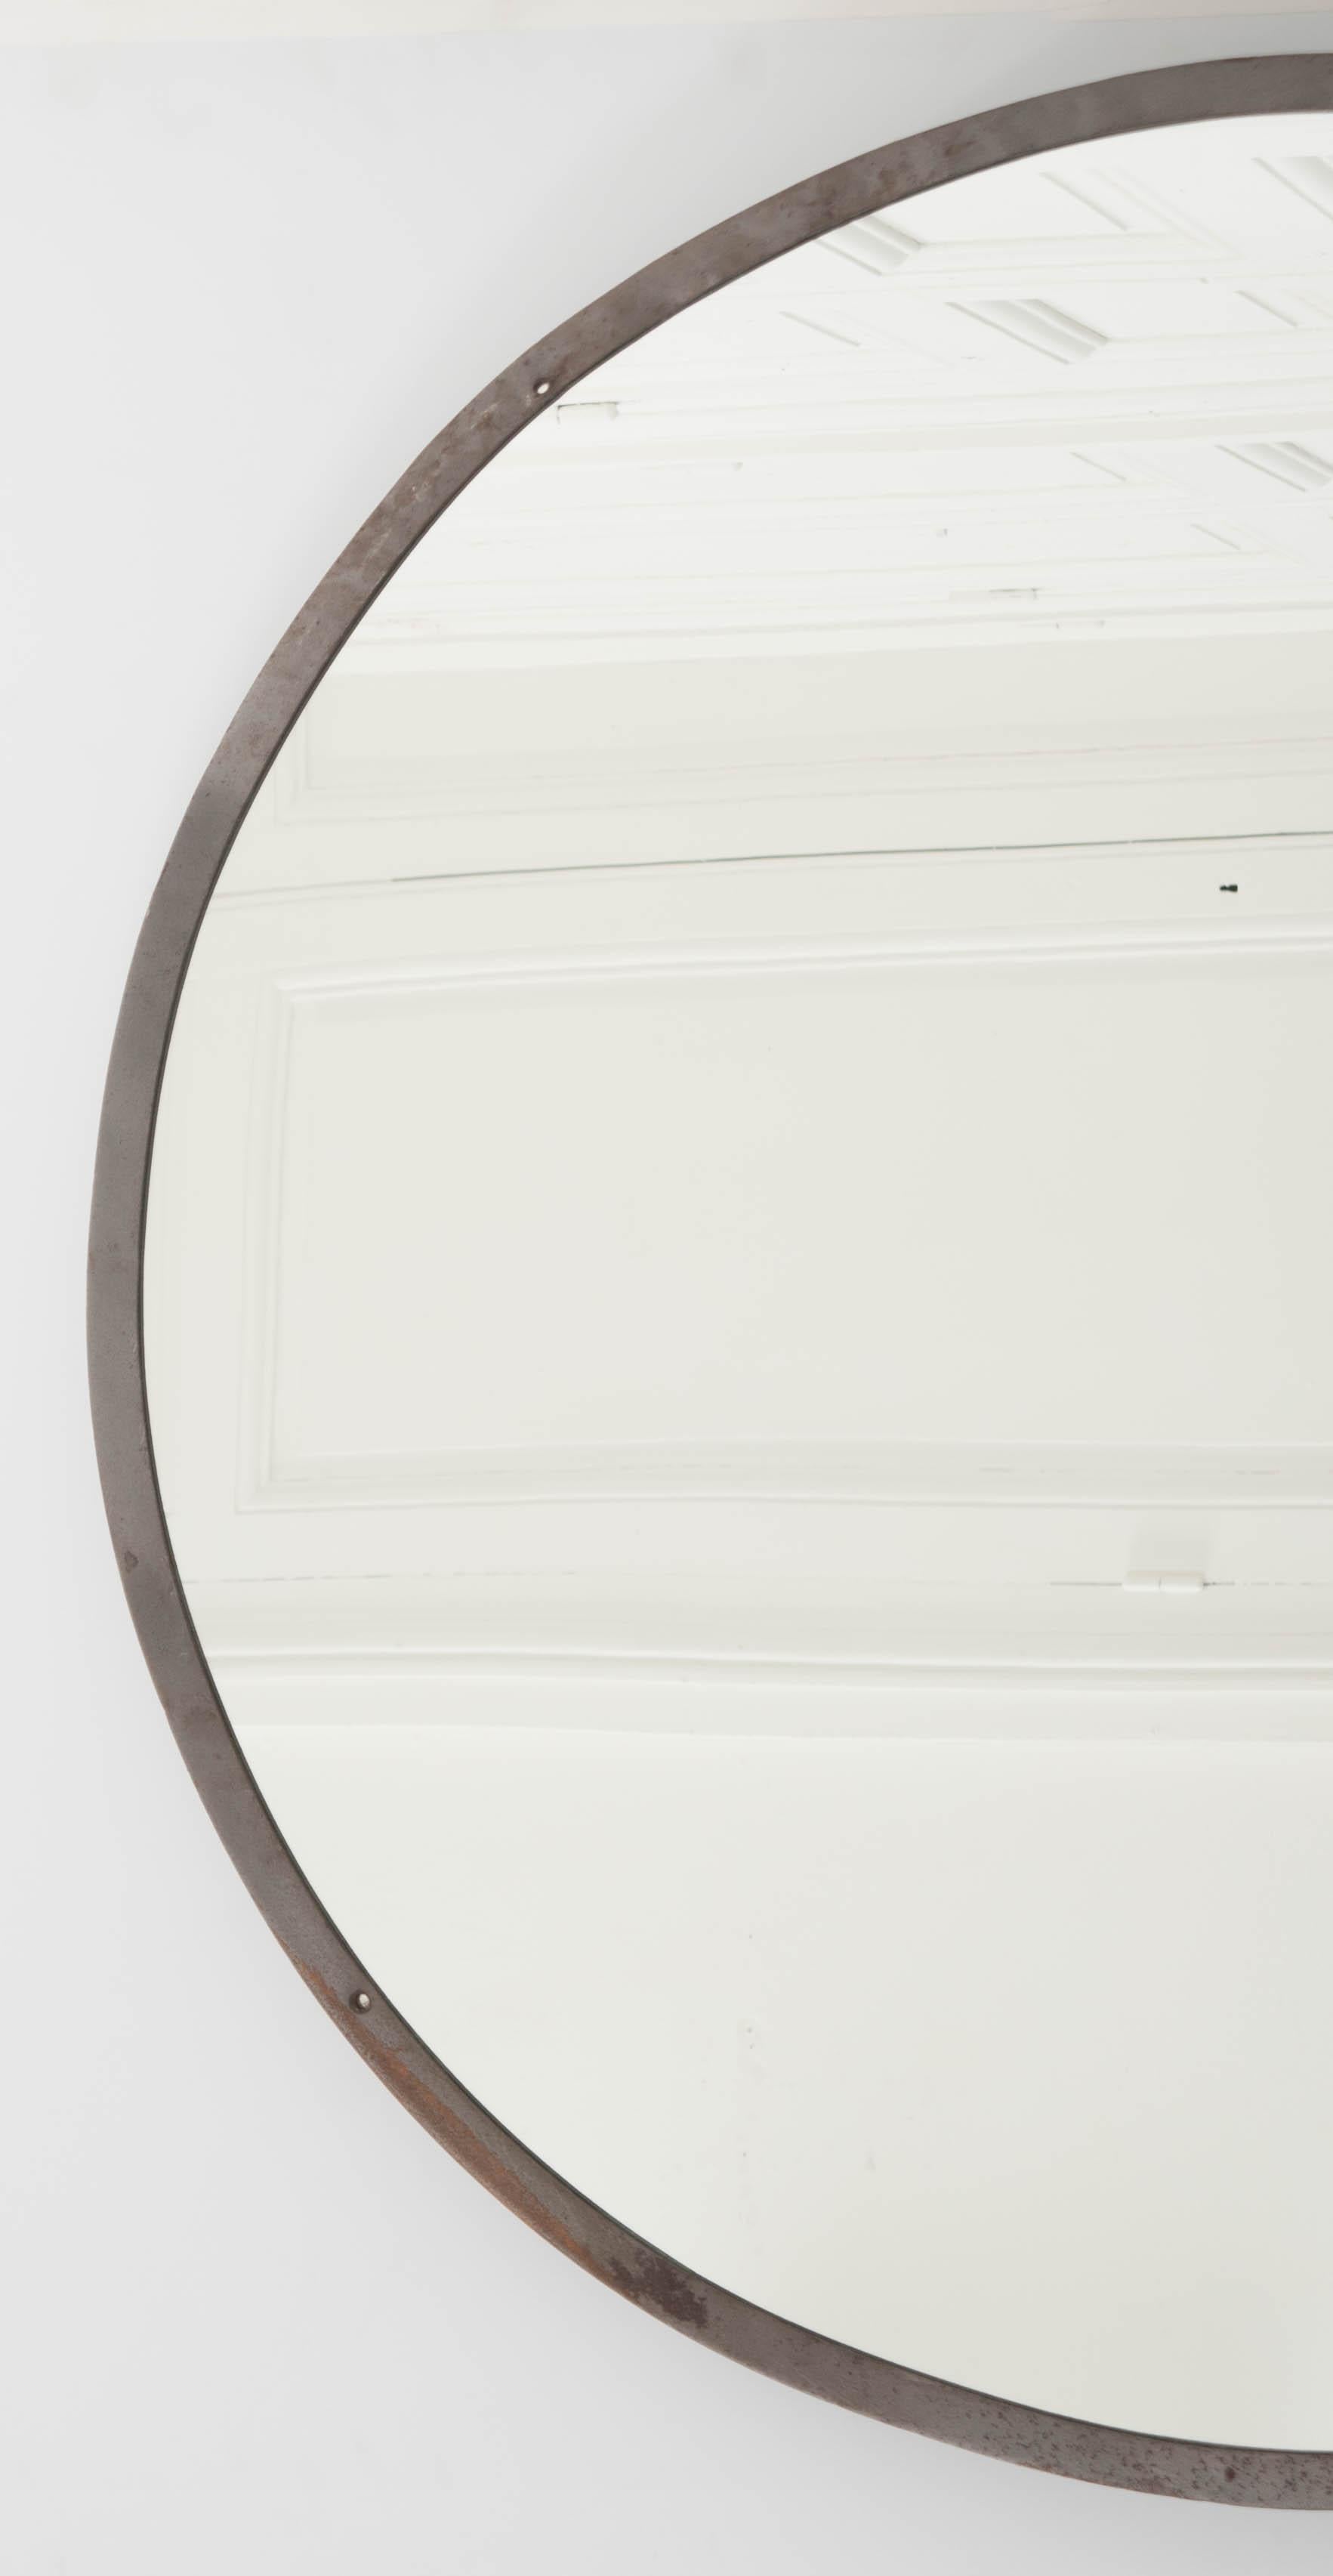 Vintage Round Mirrors with Metal Frames Are a Unique 1